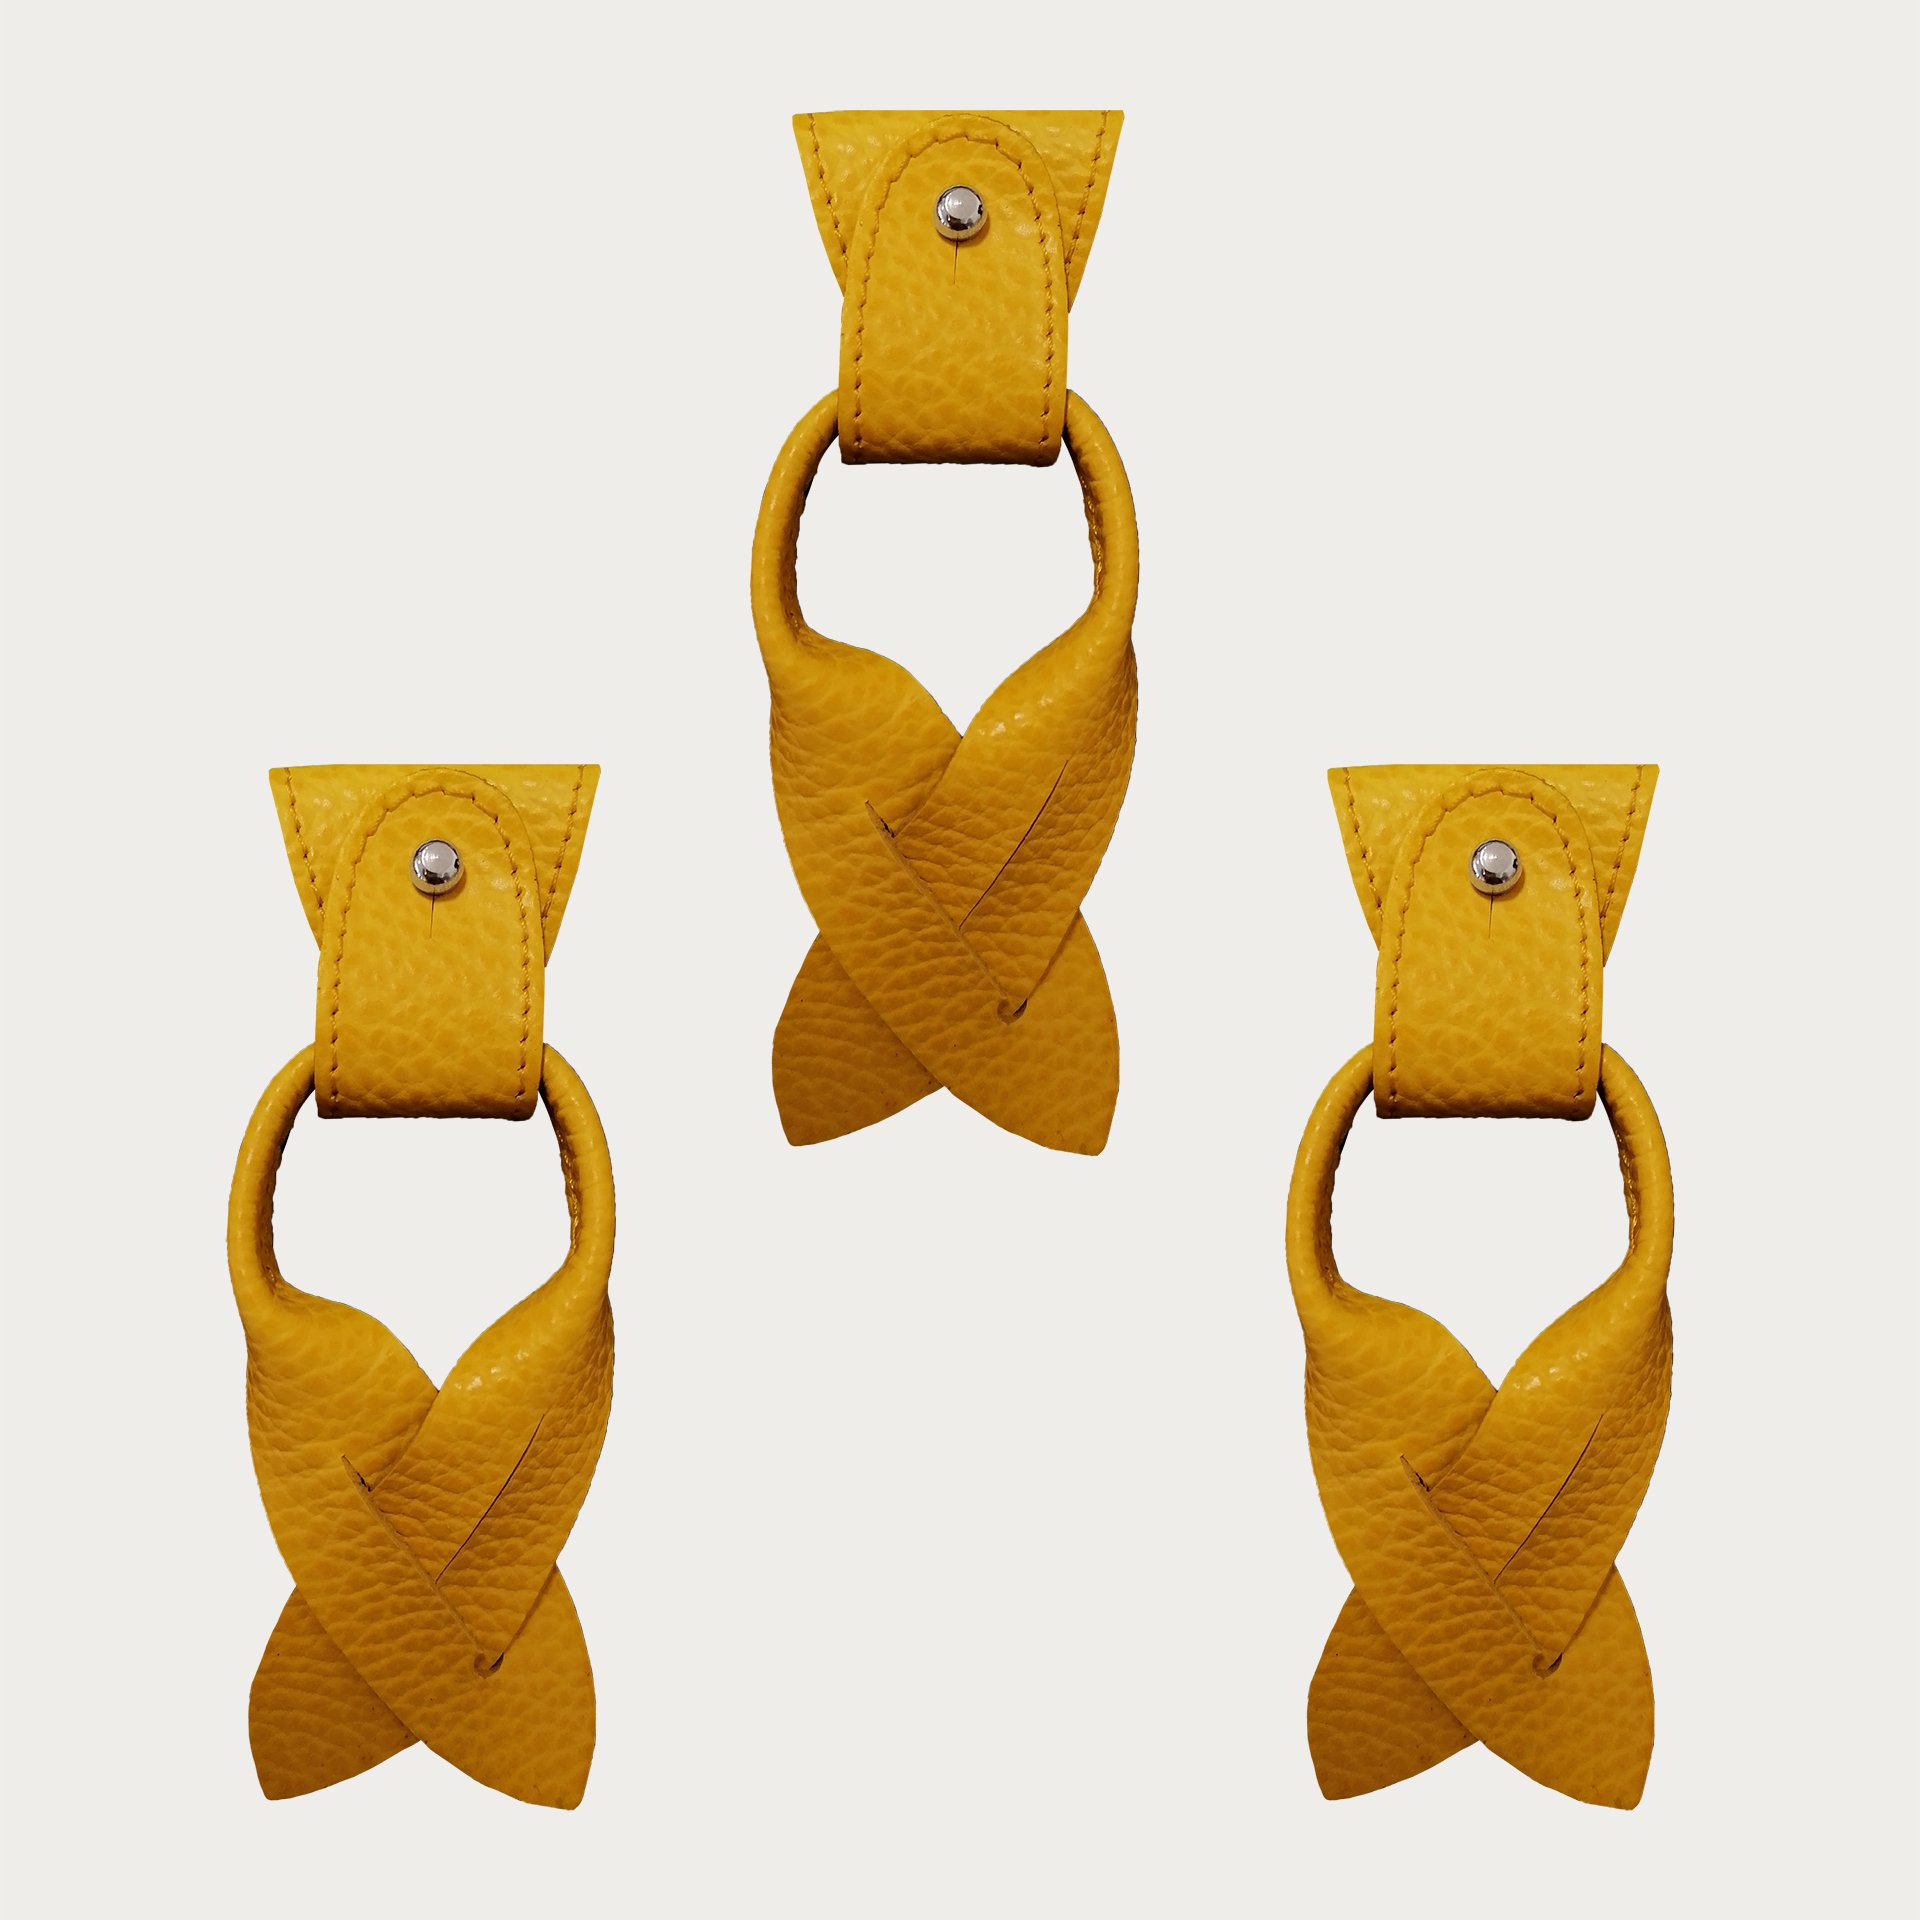 BRUCLE Replacement for Y-shape suspenders ends+ears strips for button end, yellow